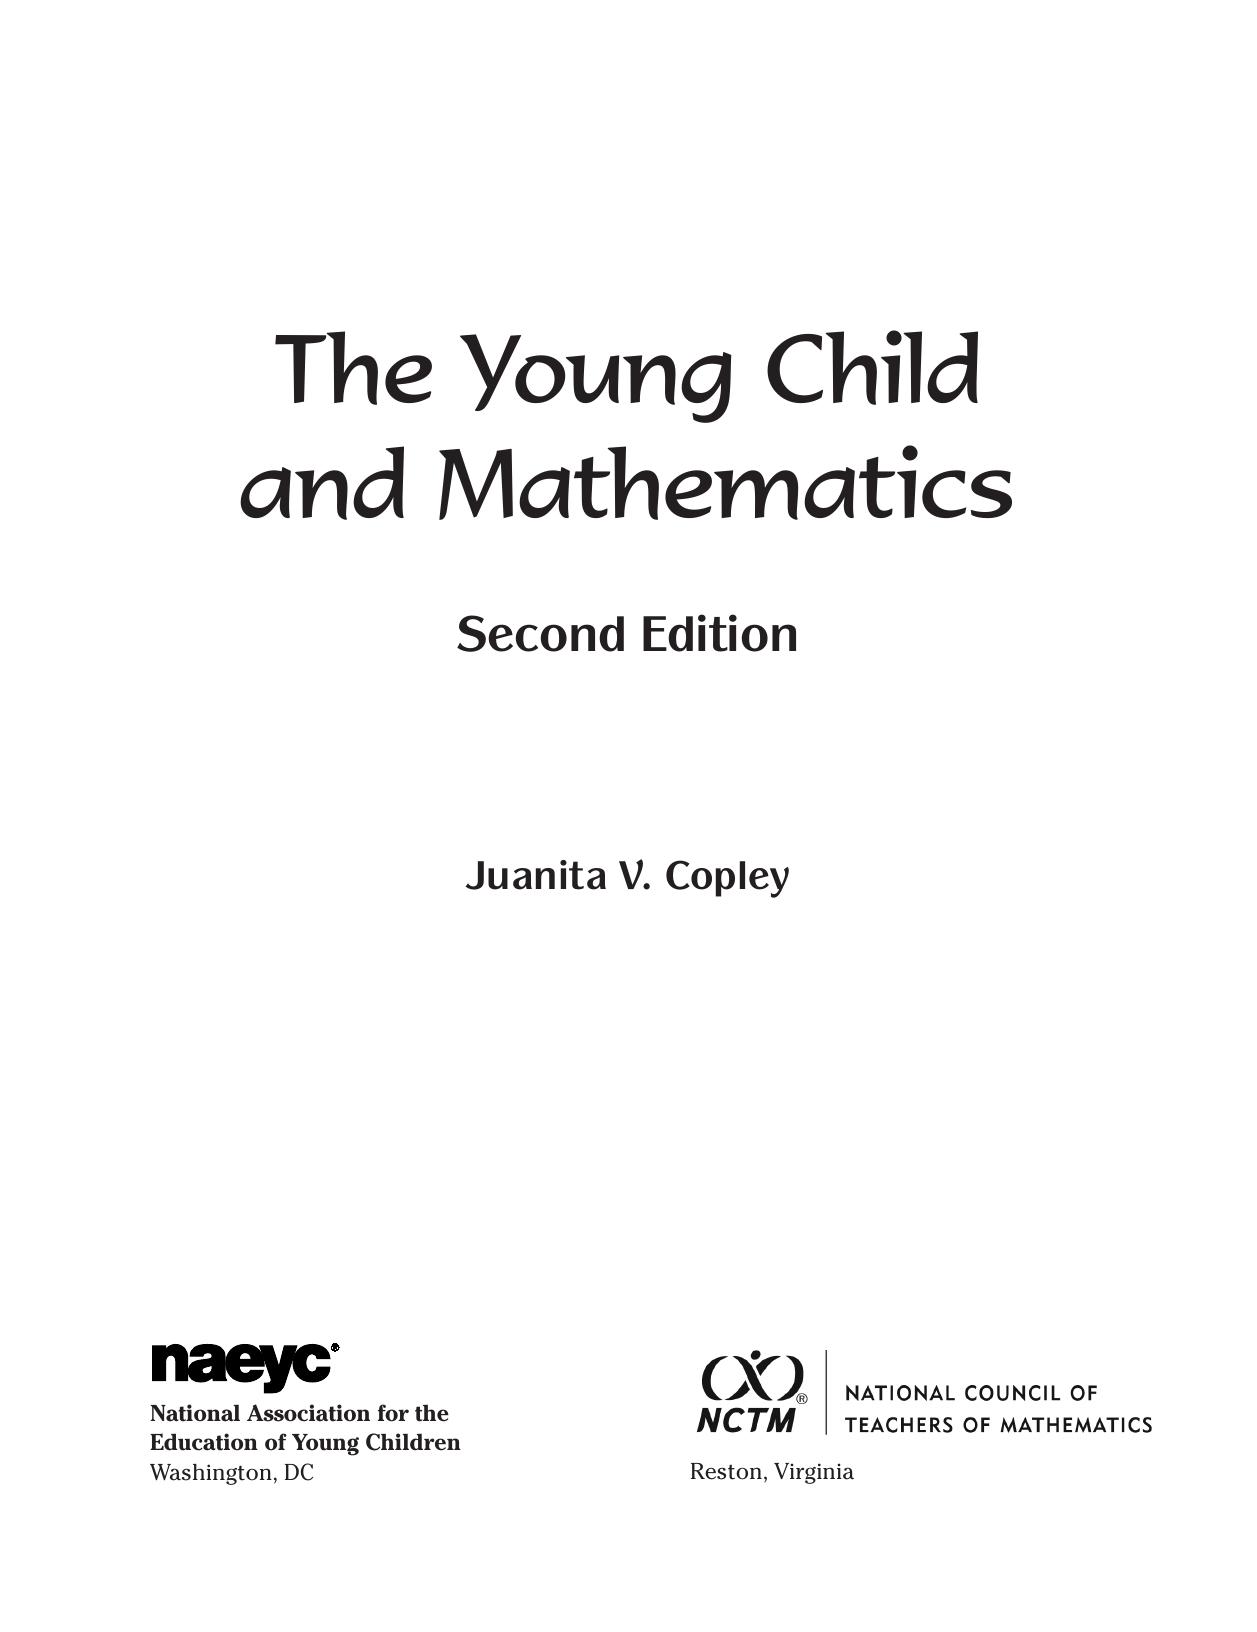 The Young Child and Mathematics by Juanita V. Copley